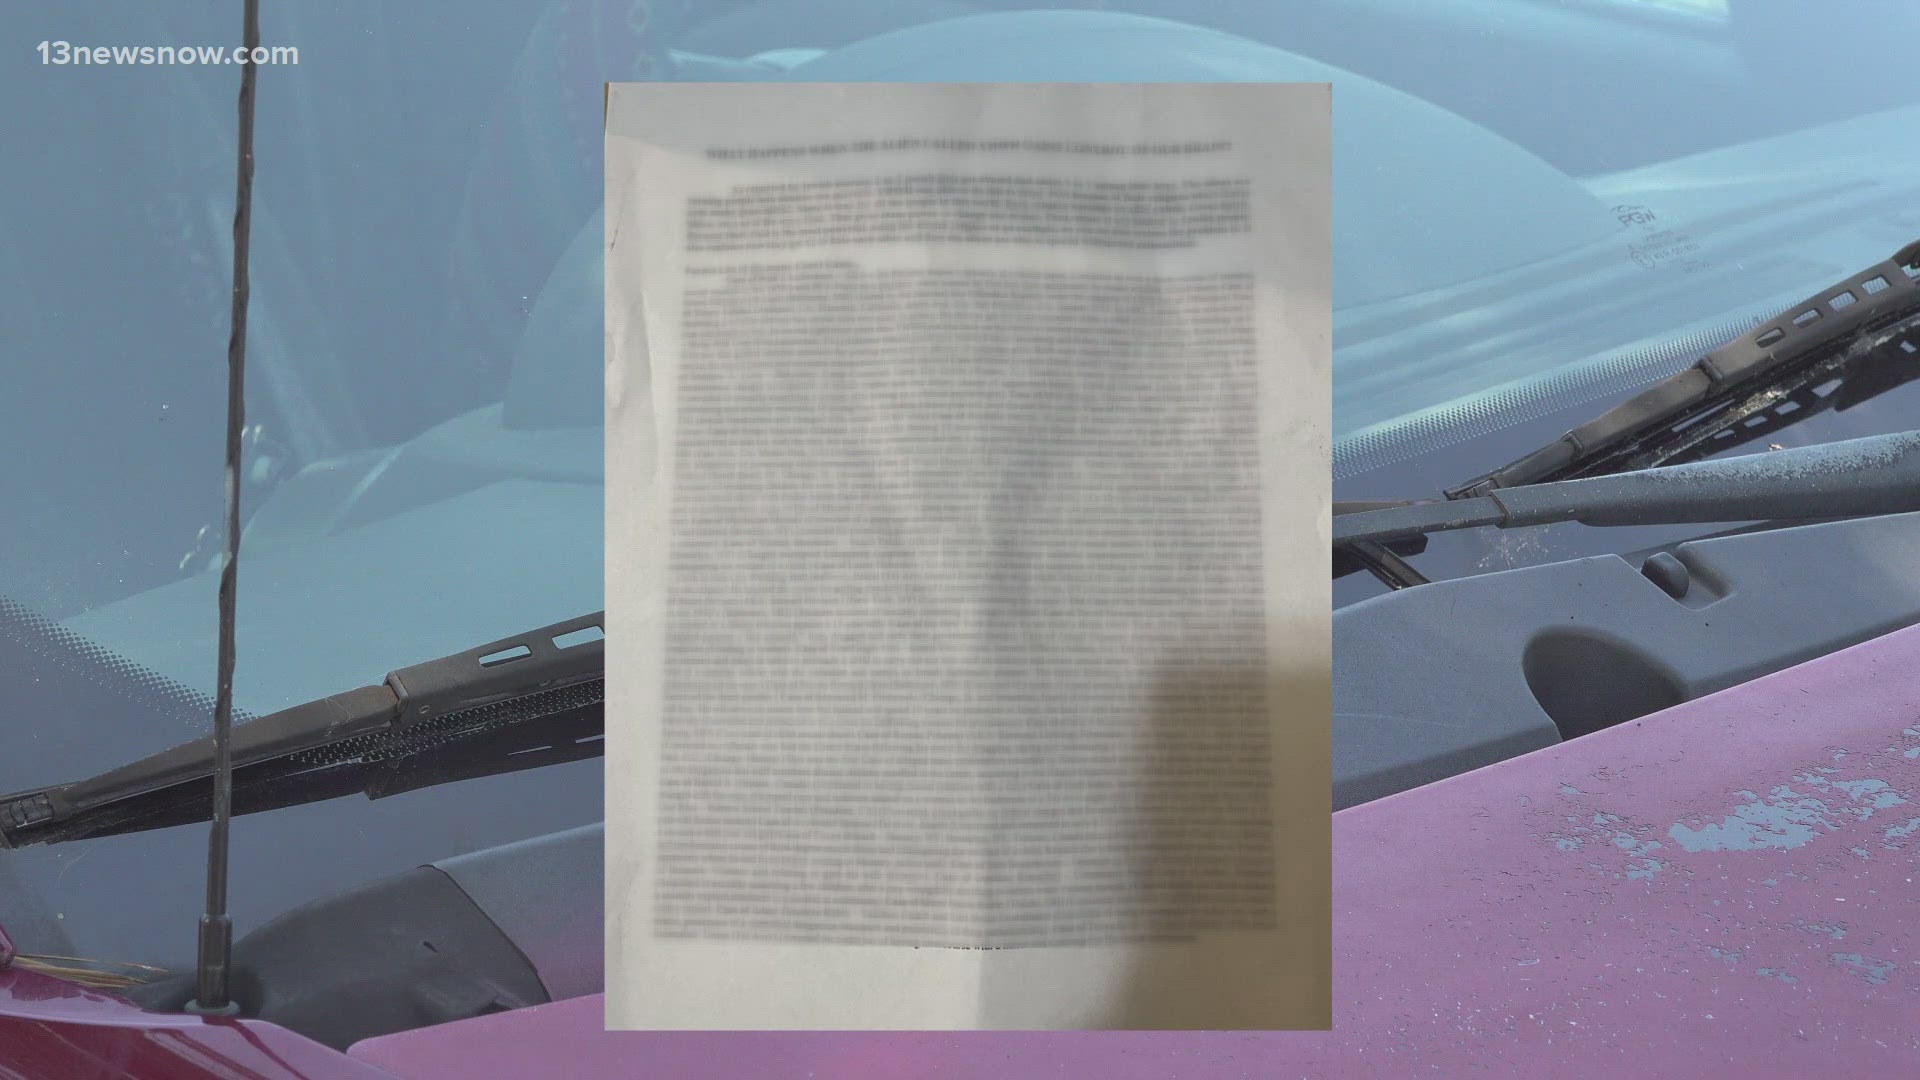 Chesapeake shoppers say they found unwanted flyers on their cars printed with hatred towards Jewish people.